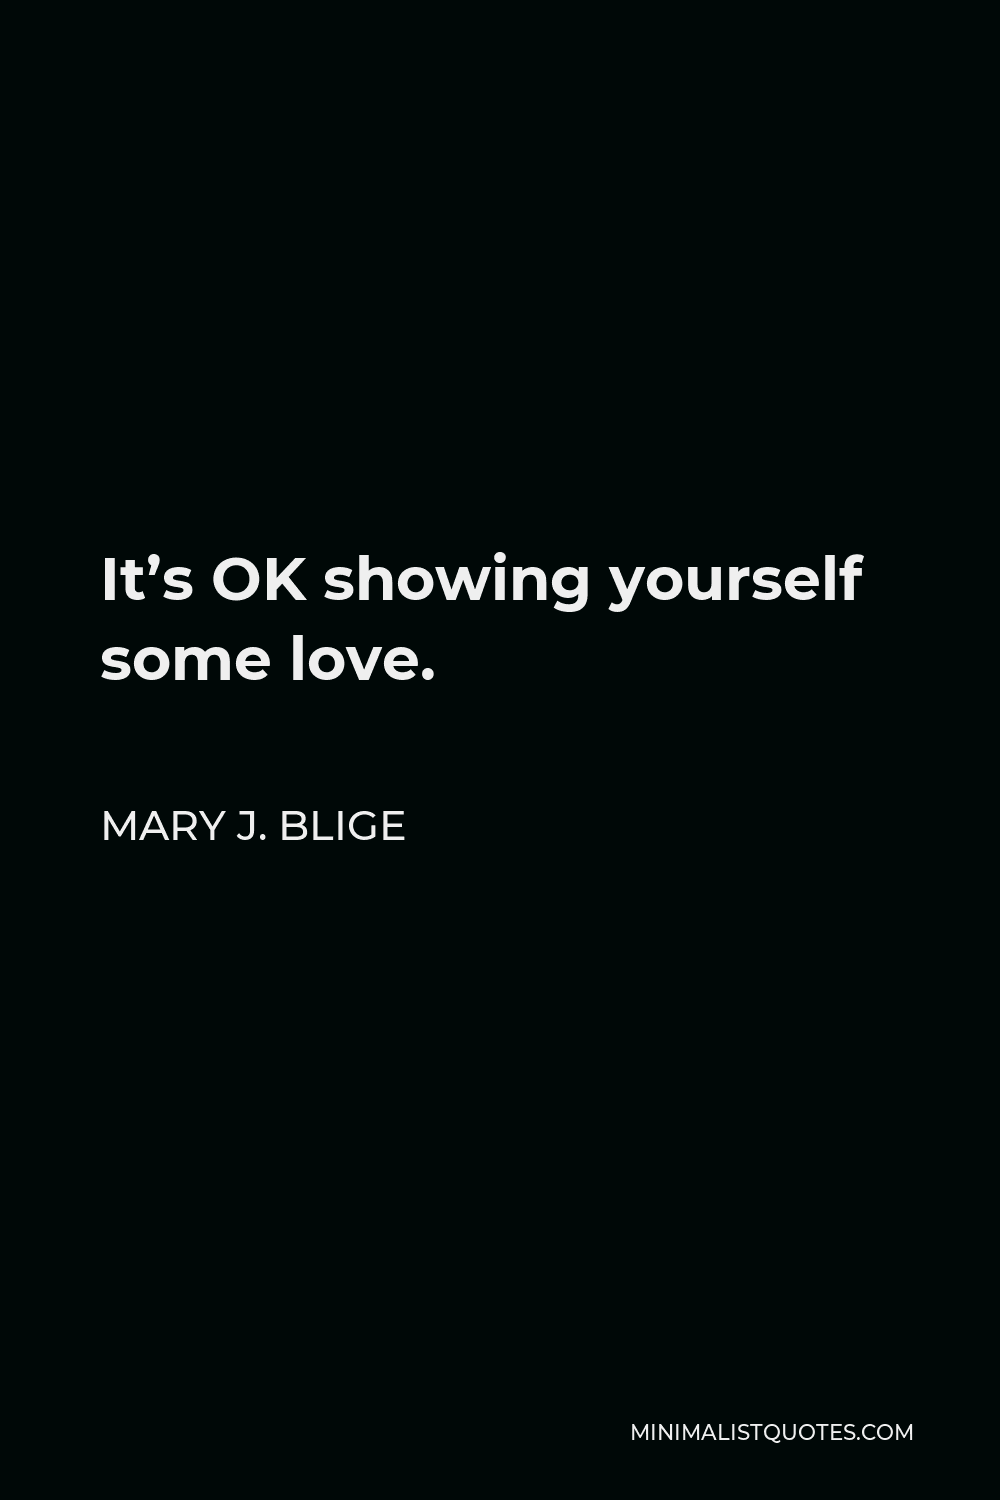 Mary J. Blige Quotes | Minimalist Quotes